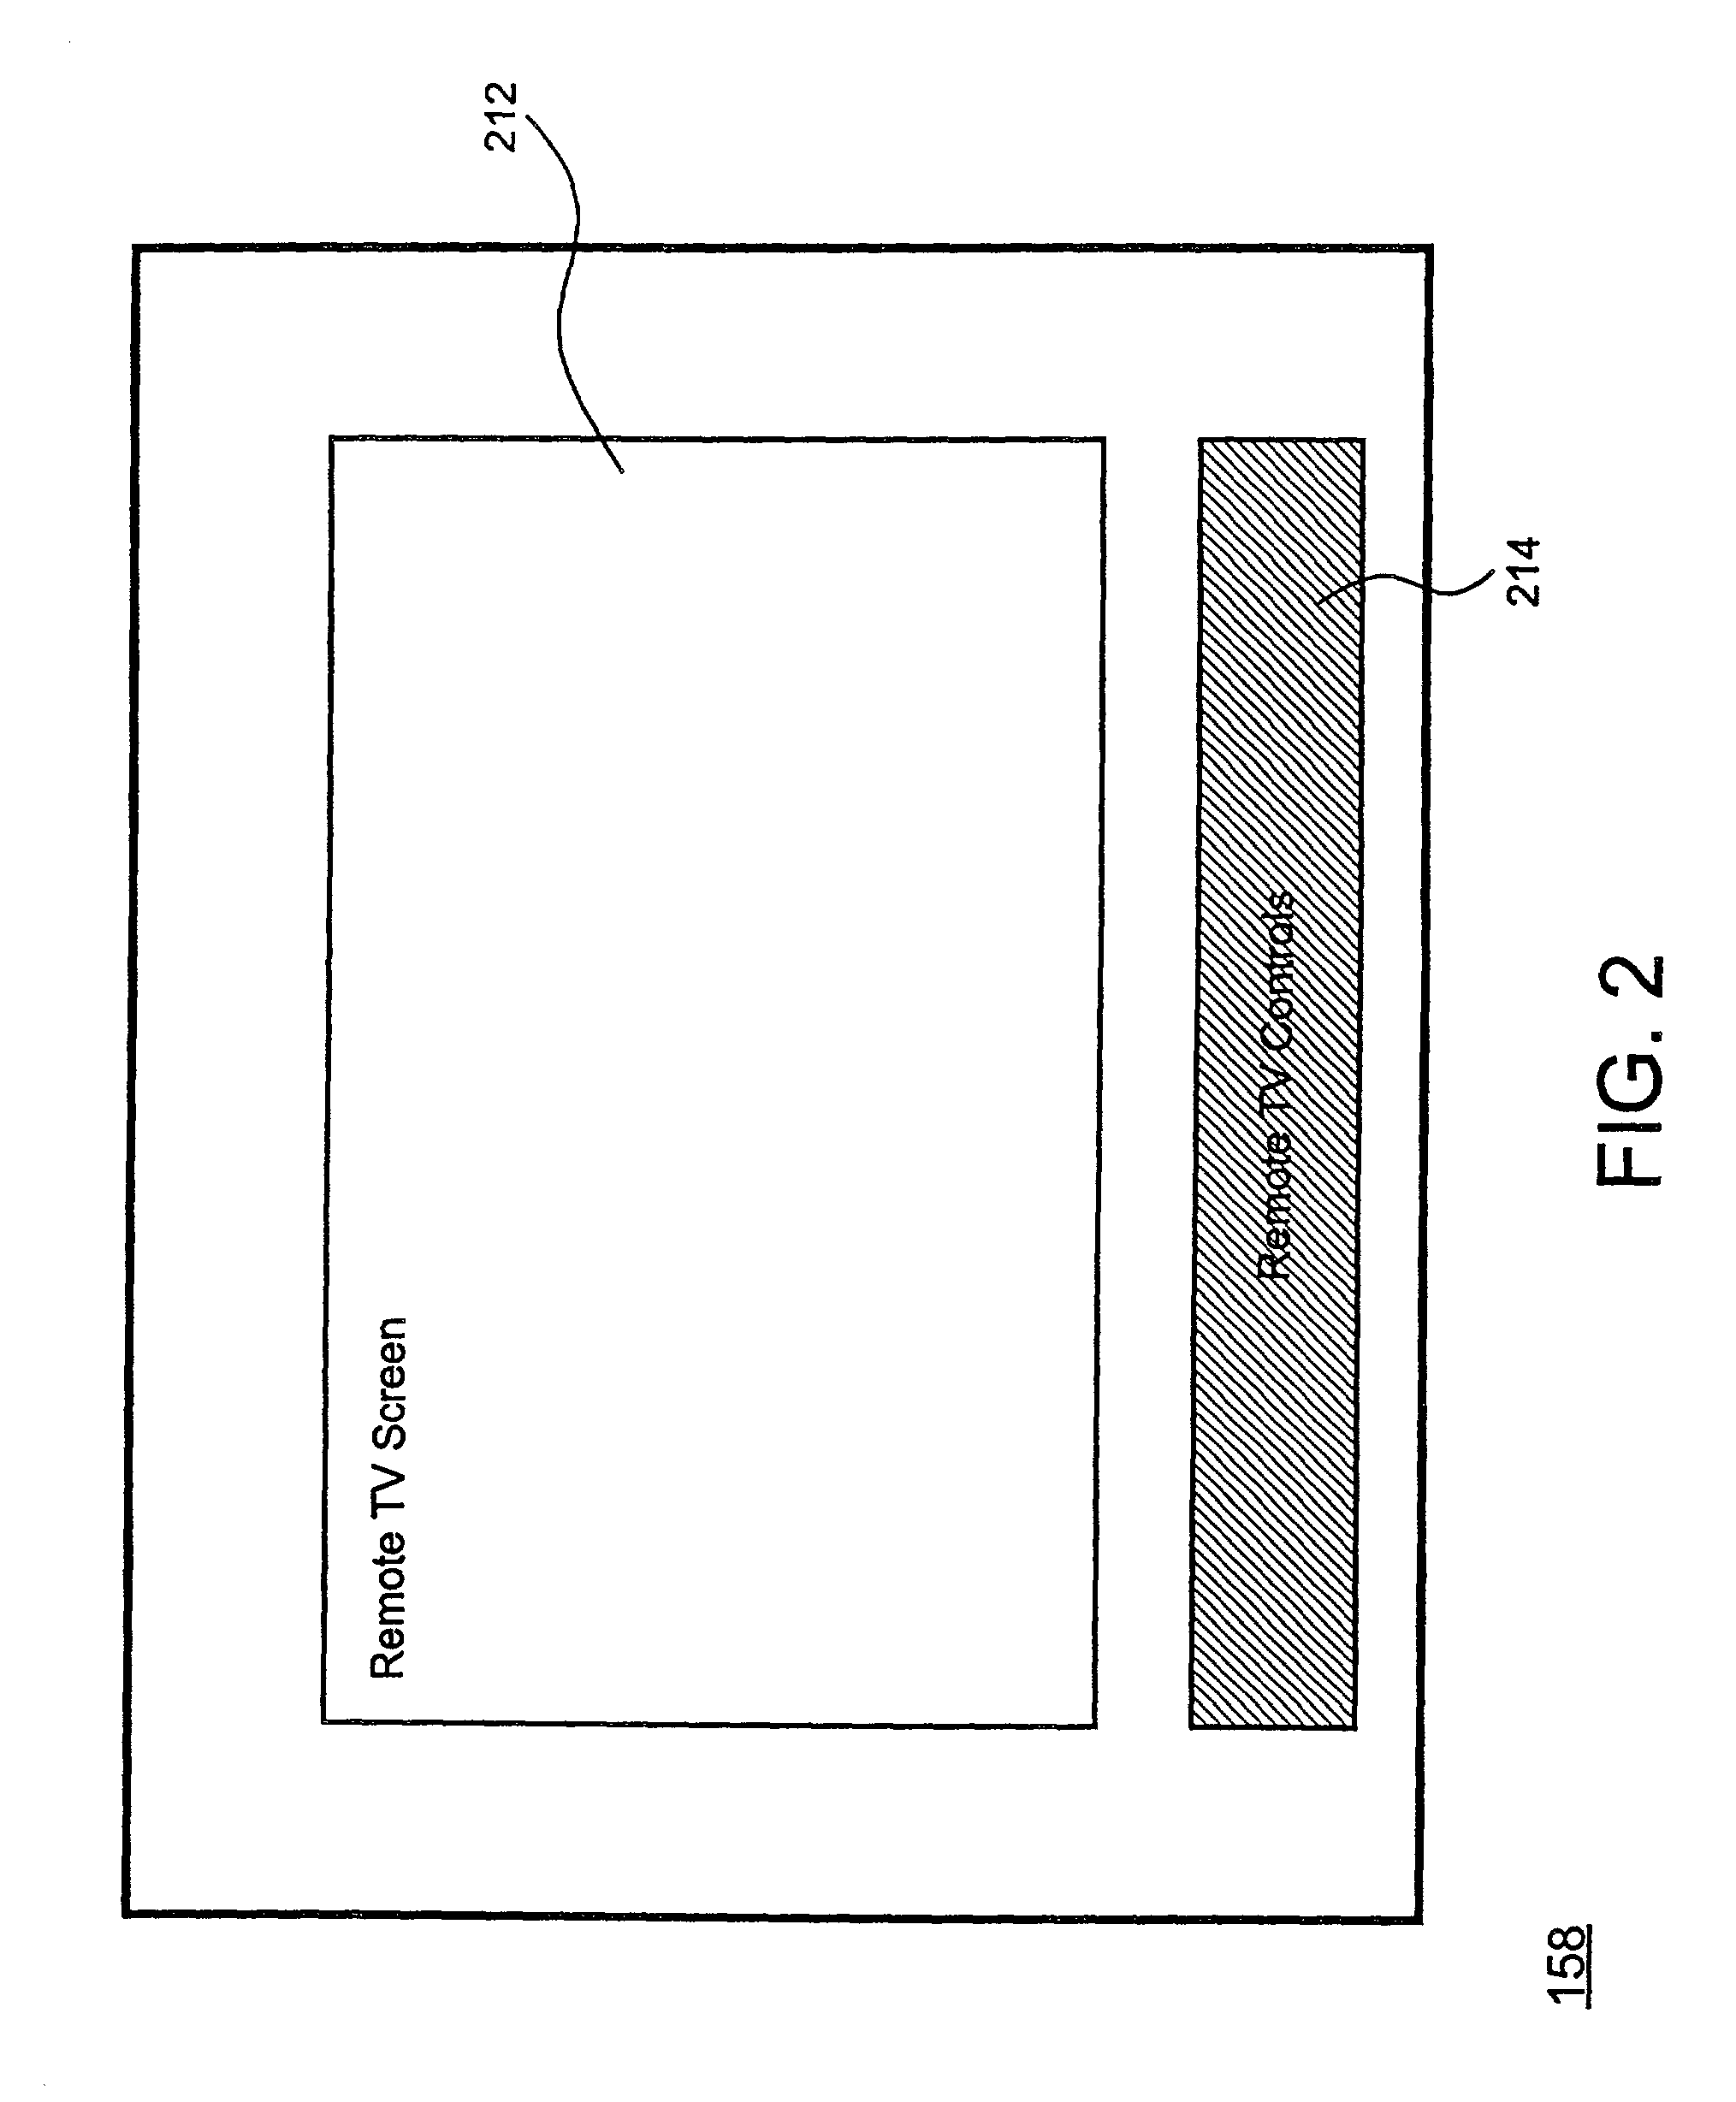 Method for implementing a remote display system with transcoding